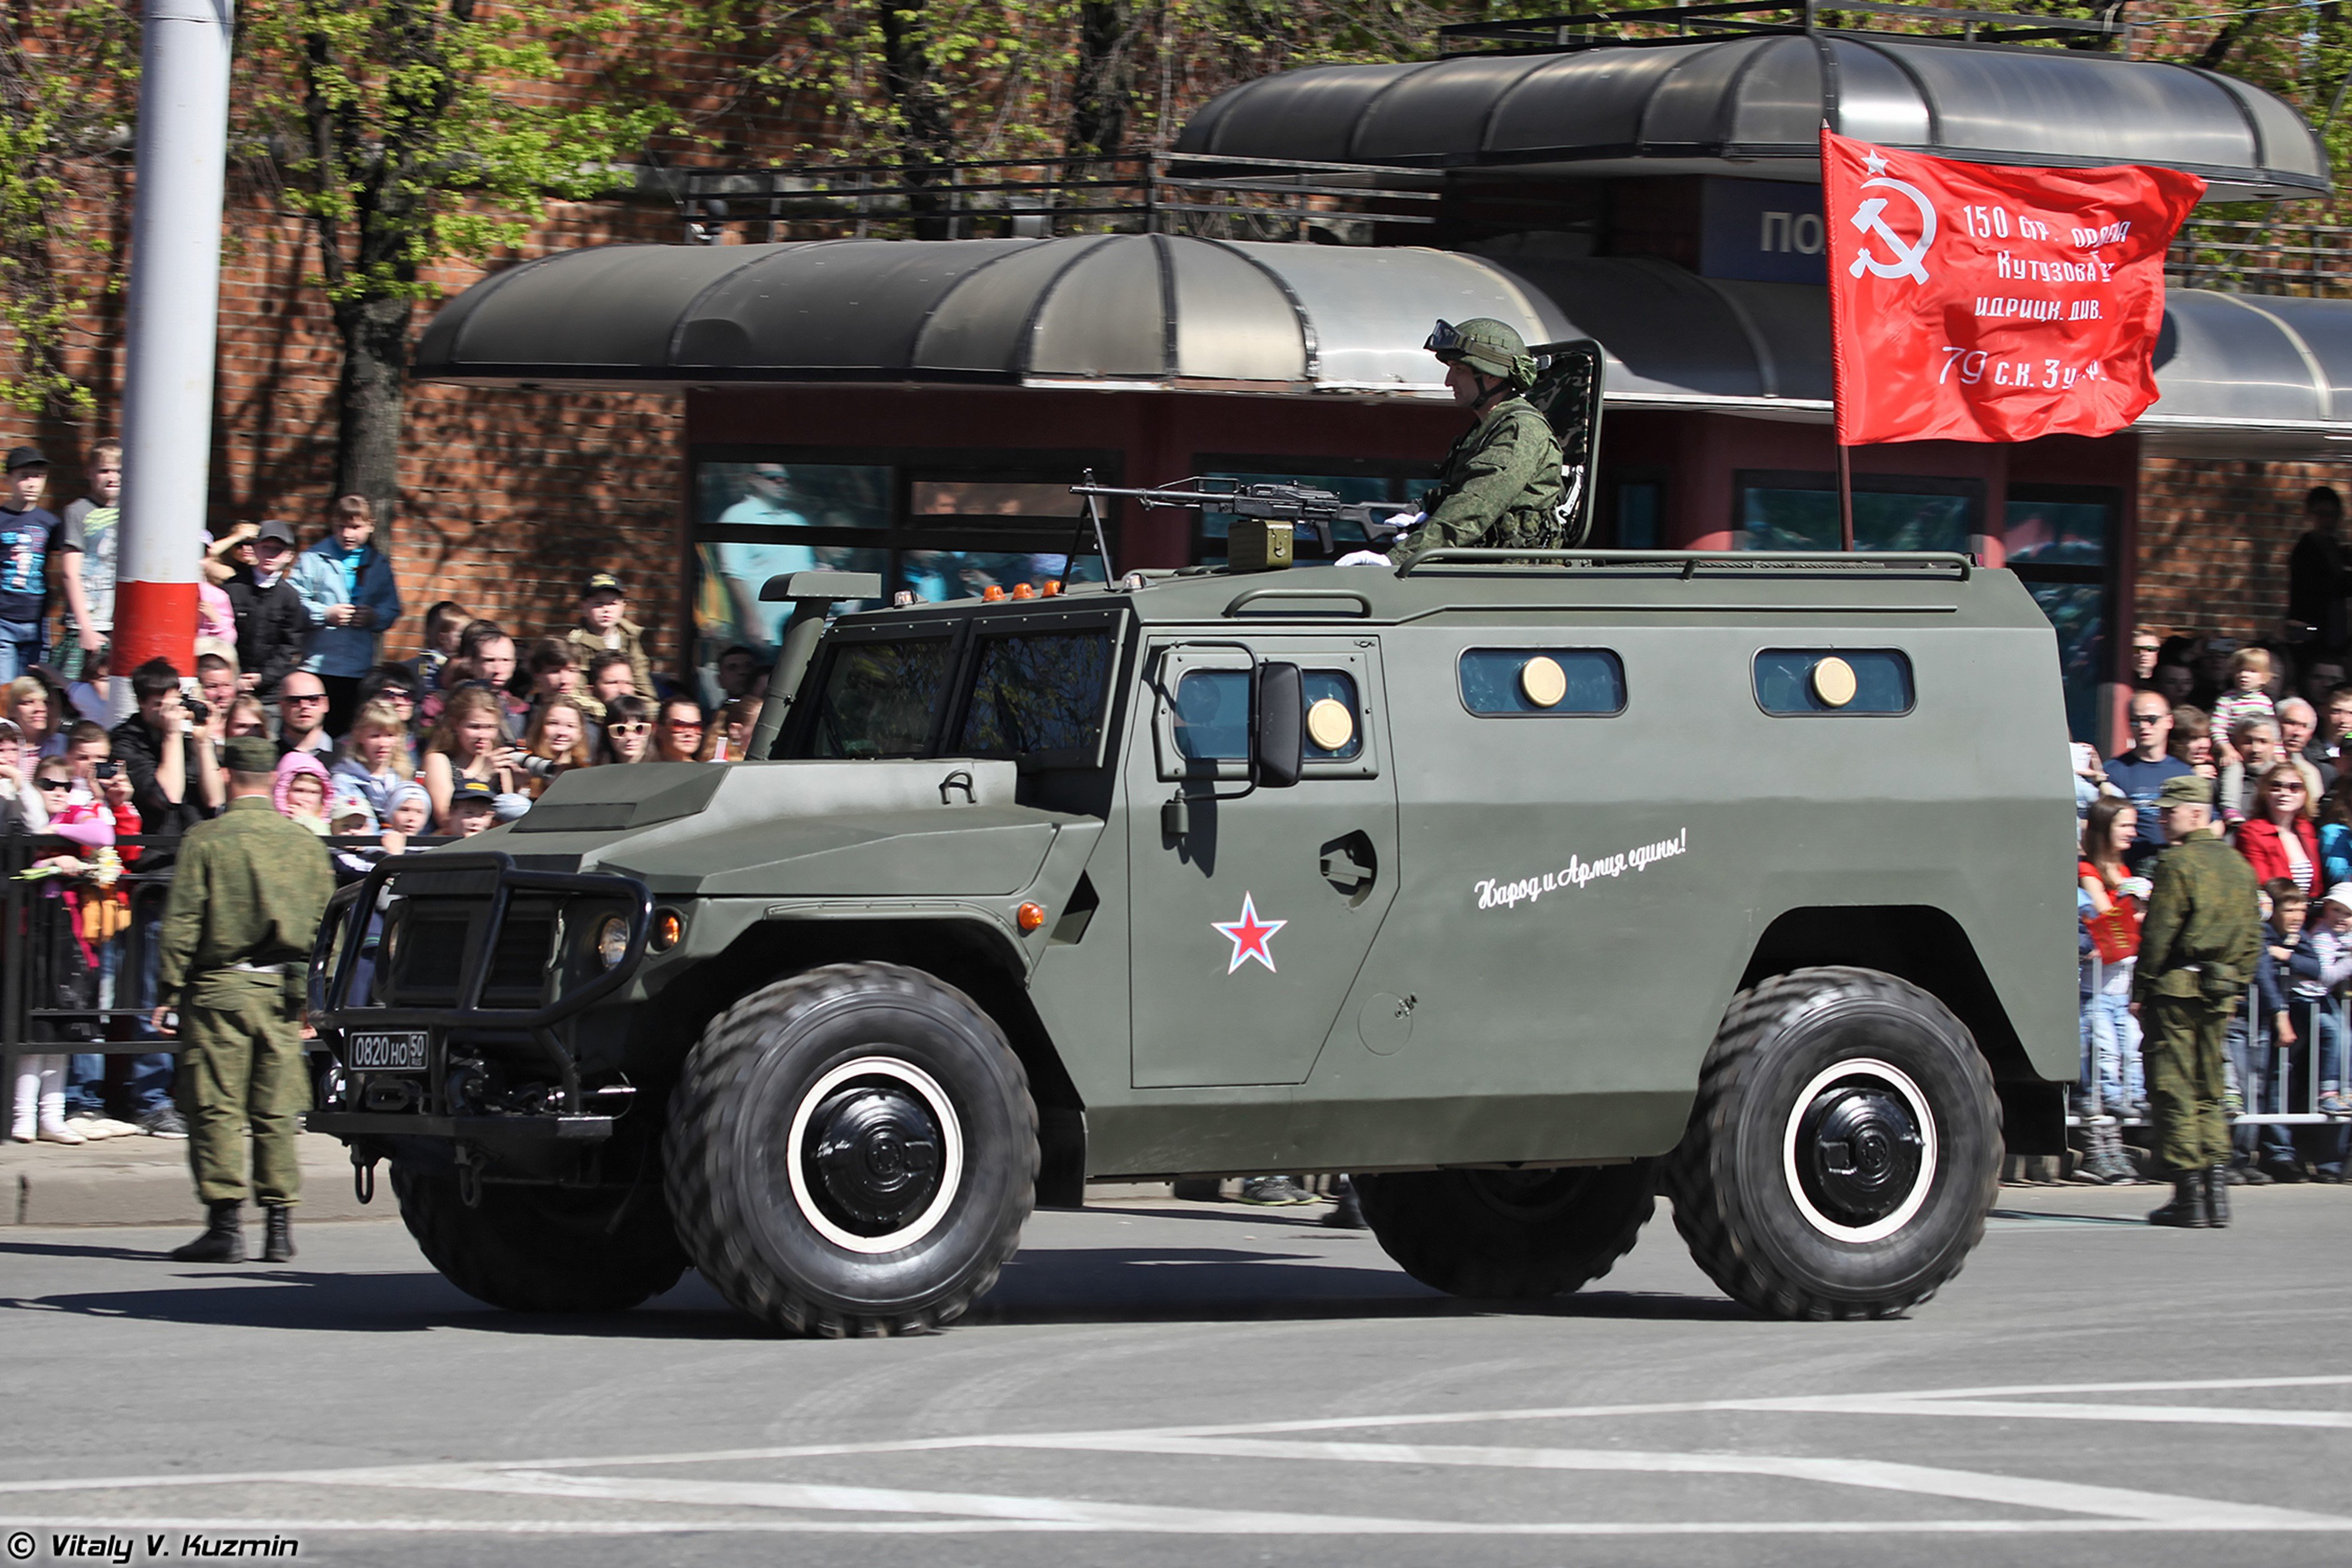 2014, Victory, Day, Parade in nizhny novgorod, Russia, Military, Russian, Army, Red star, 4x4, Special, Armored, Vehicle, Sbm, Vpk 233136, 2, 4000x2667 Wallpaper